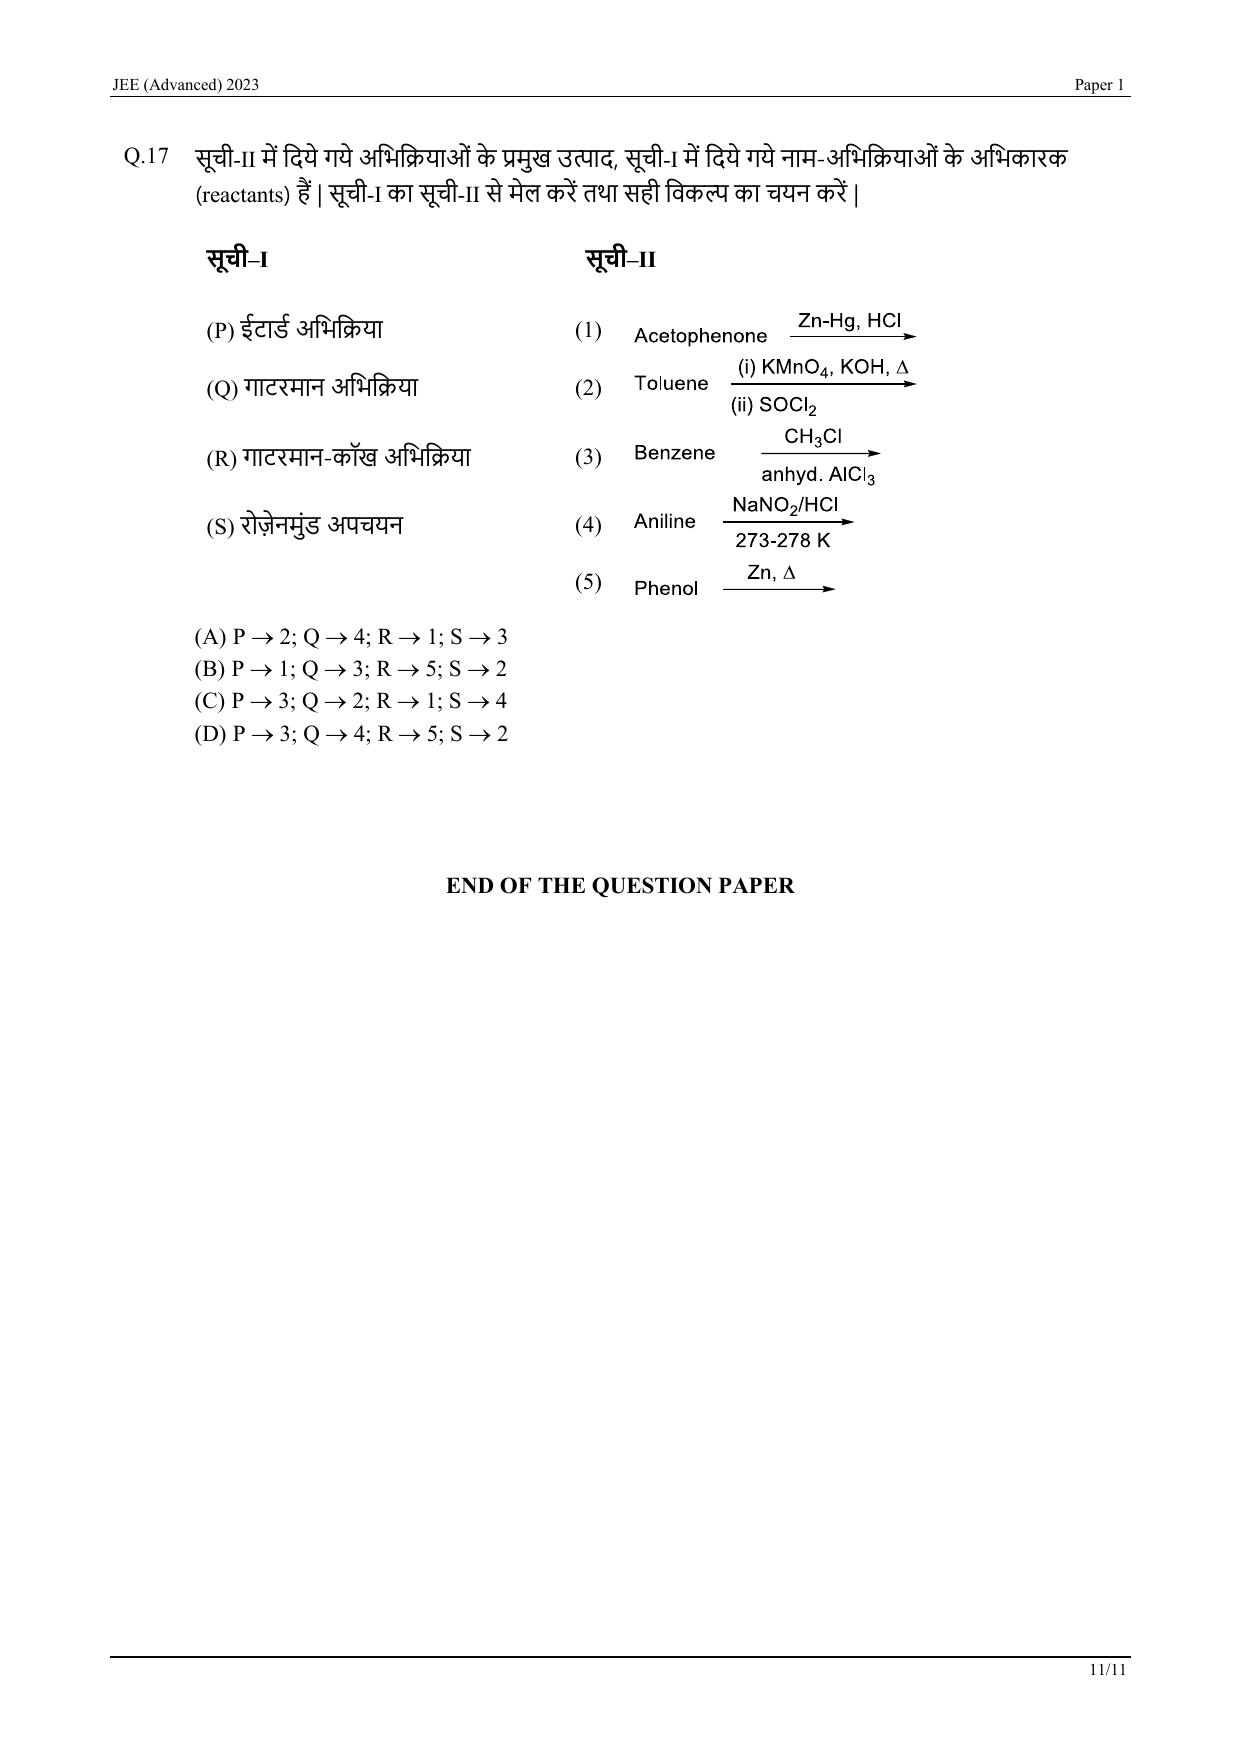 JEE Advanced 2023 Question Paper 1 (Hindi) - Page 31